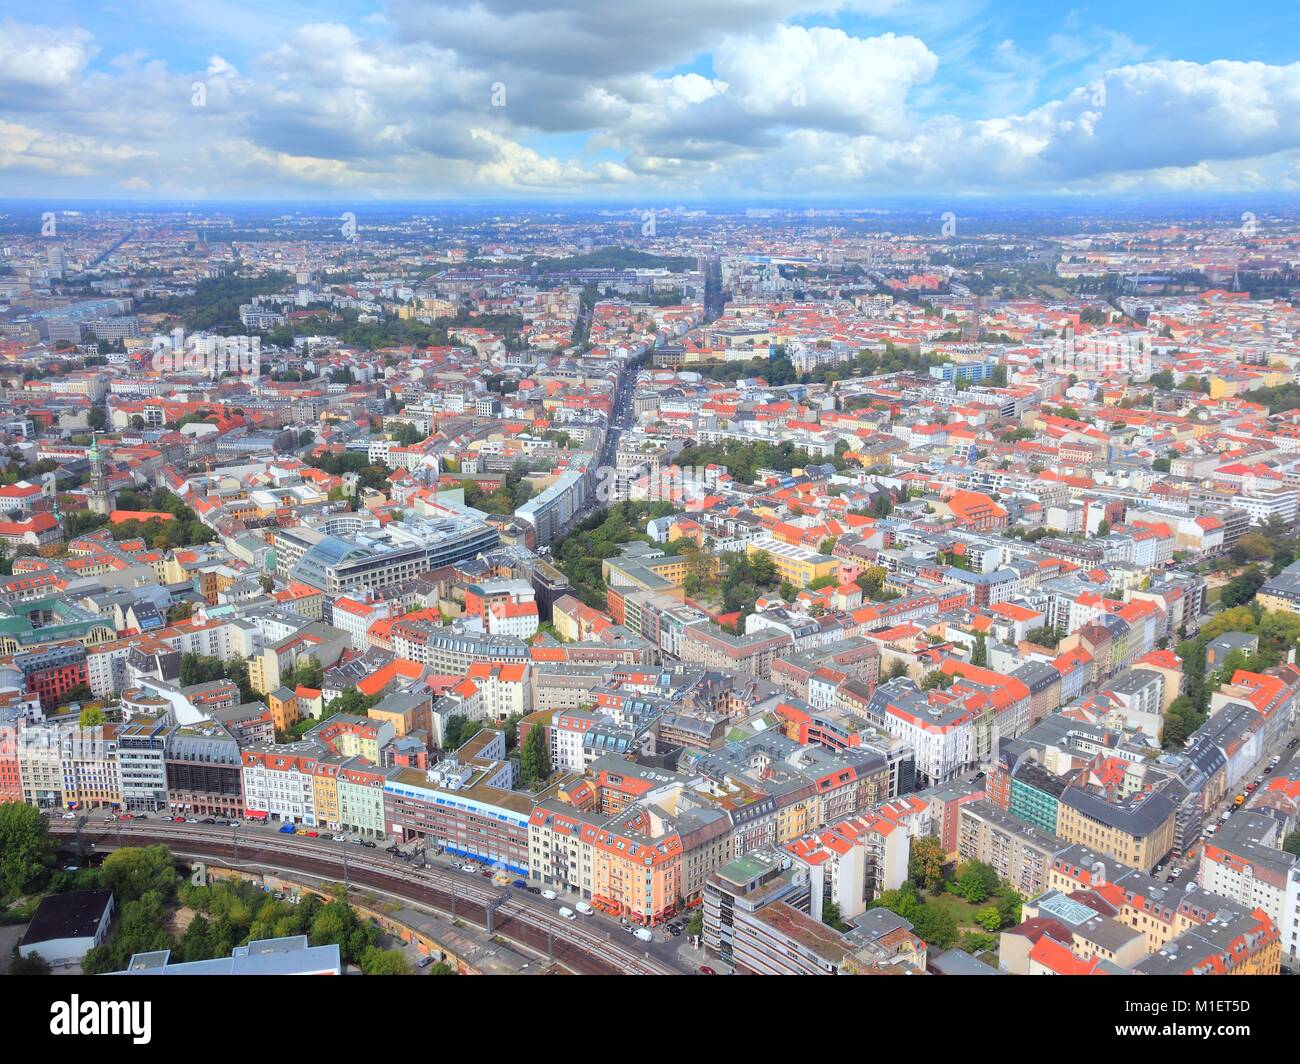 Berlin, Germany. Capital city architecture aerial view with Mitte and Gesundbrunnen districts. Stock Photo